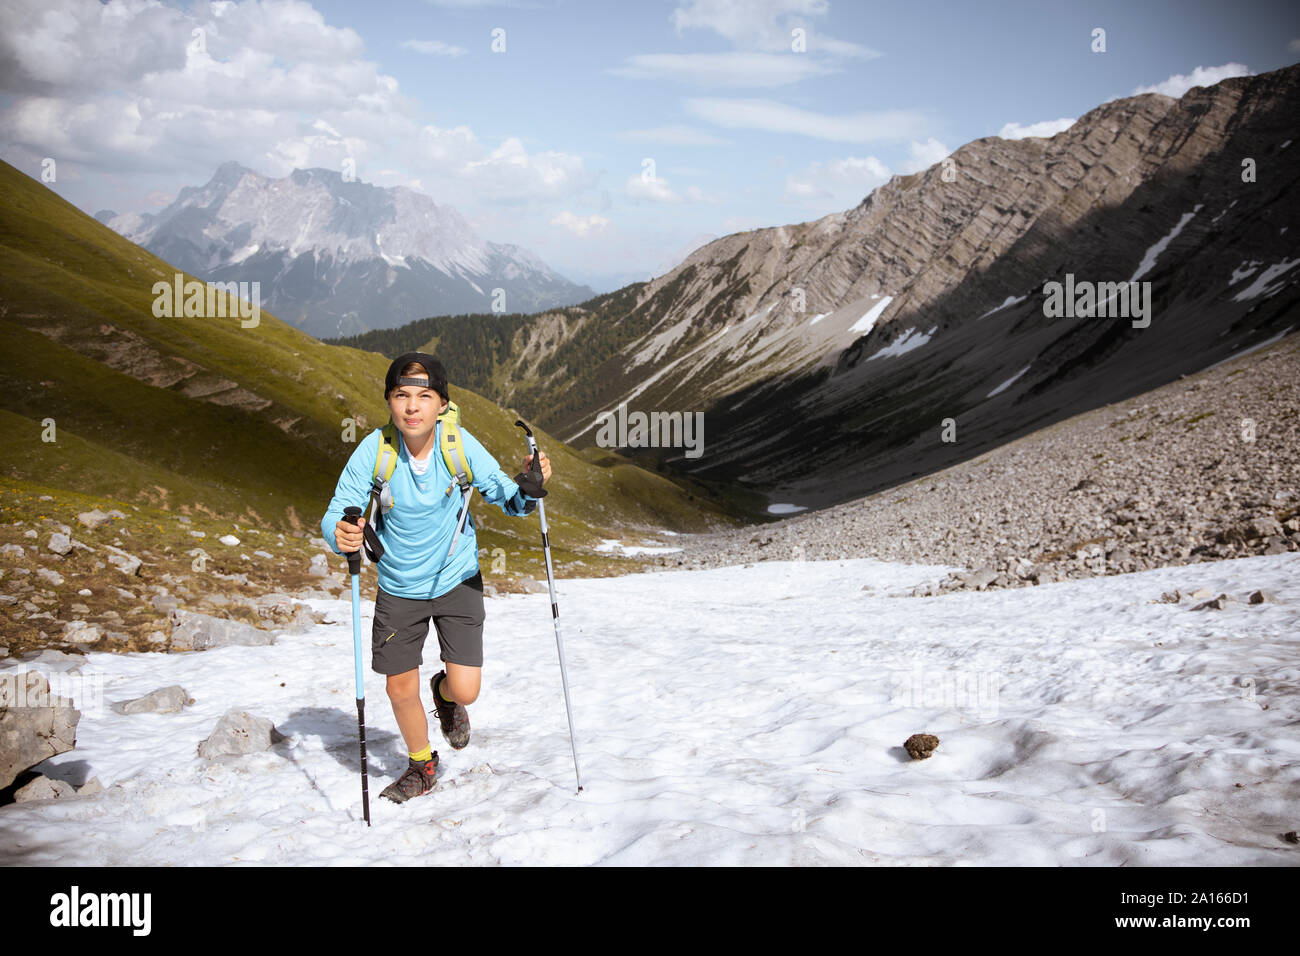 Boy hiking in the mountains Stock Photo